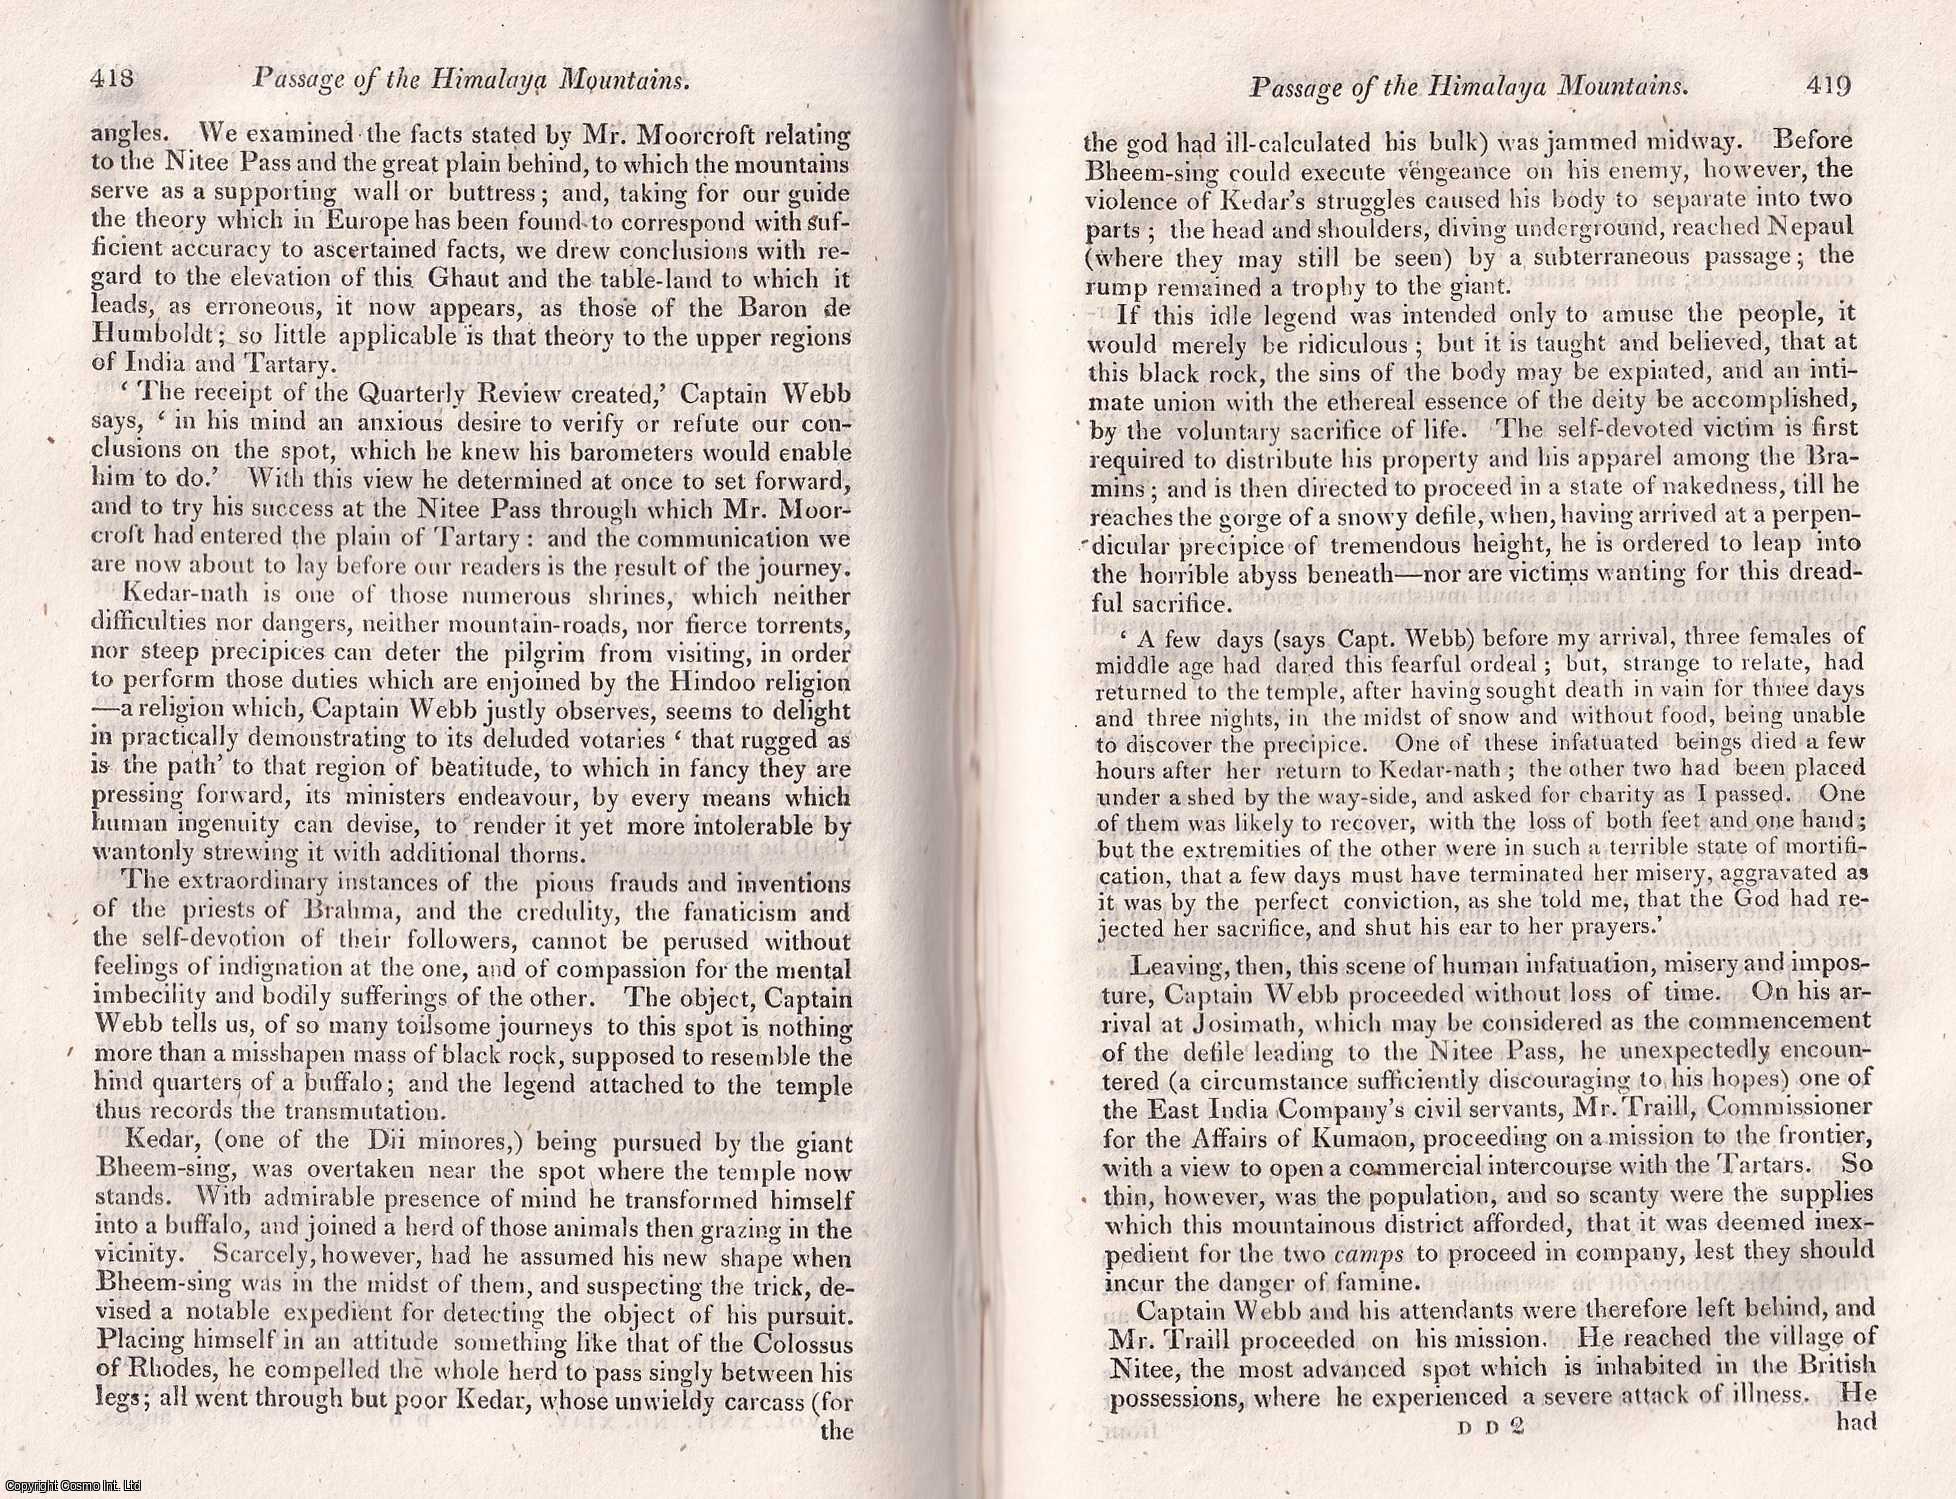 John Barrow - Passage of the Himalaya Mountains; the investigations of Humboldt and Captain Webb, of the East India Company, to determine the atmospheric phenomena. An uncommon original article from The Quarterly Review, 1820.